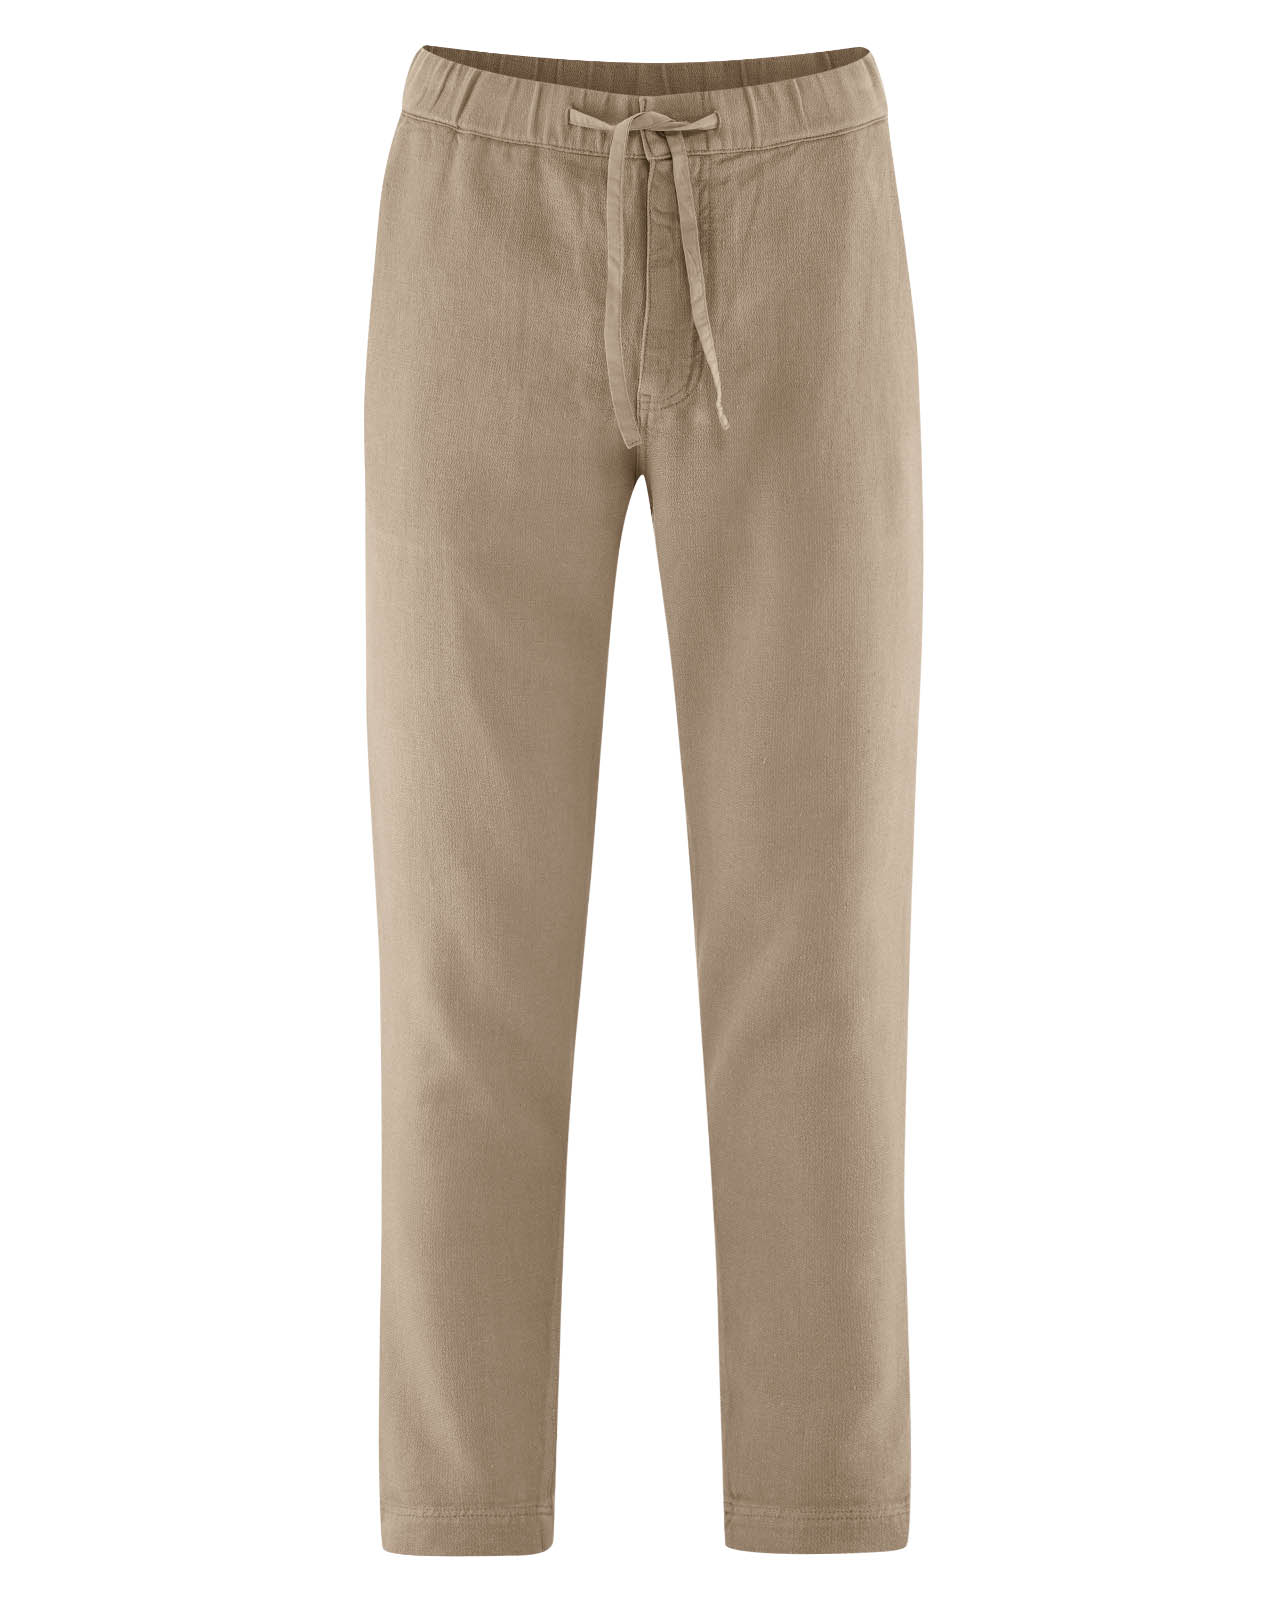 DH584 Unisex trousers, woven